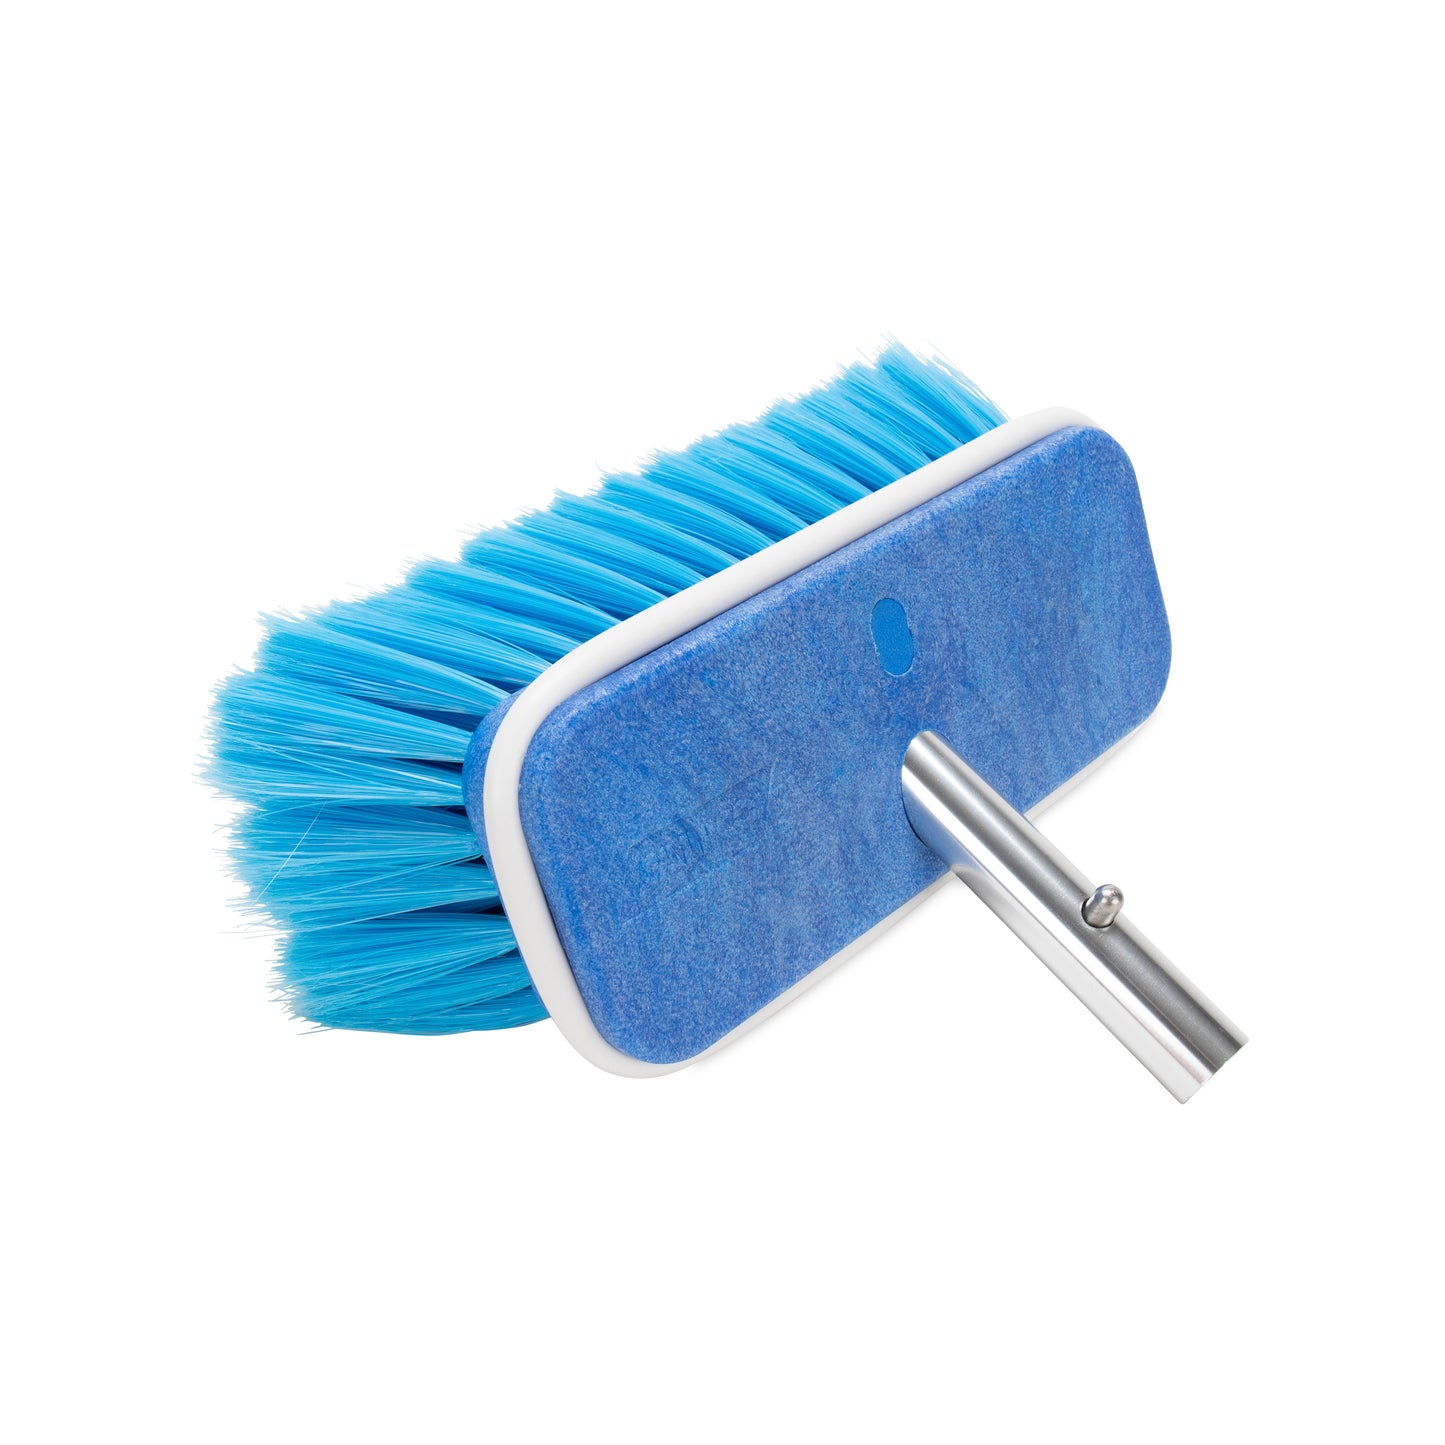 Camco Extra Soft Brush Attachment for Multipurpose Fixed Handle Boat Cleaning Tool